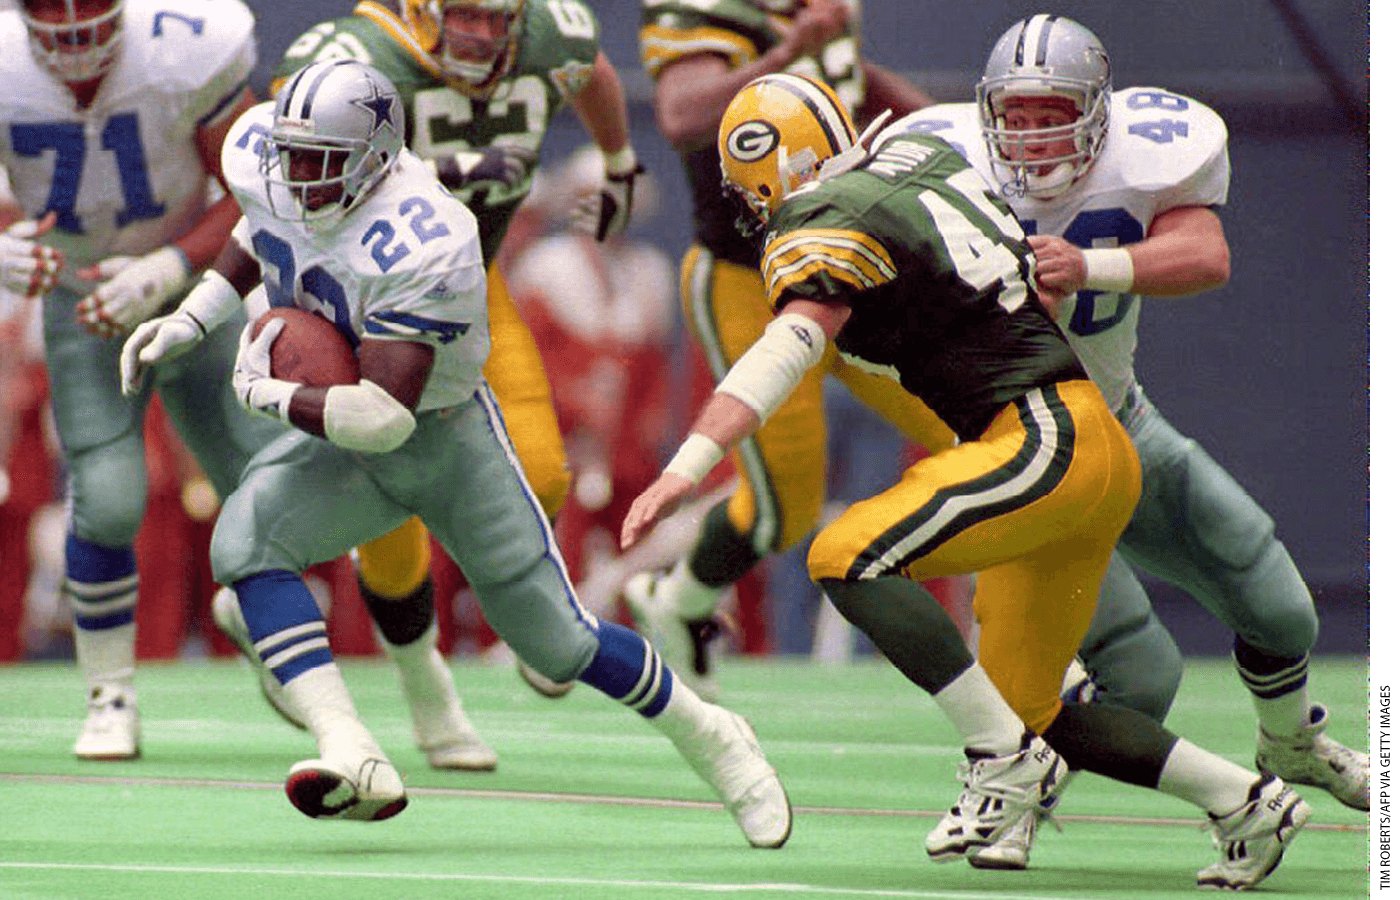 Dallas Cowboys running back Emmitt Smith (22) cuts around teammate Daryl Johnston (48) as Johnston makes a block on Green Bay Packers safety Mike Prior (45) during second quarter action 03 October 1993.